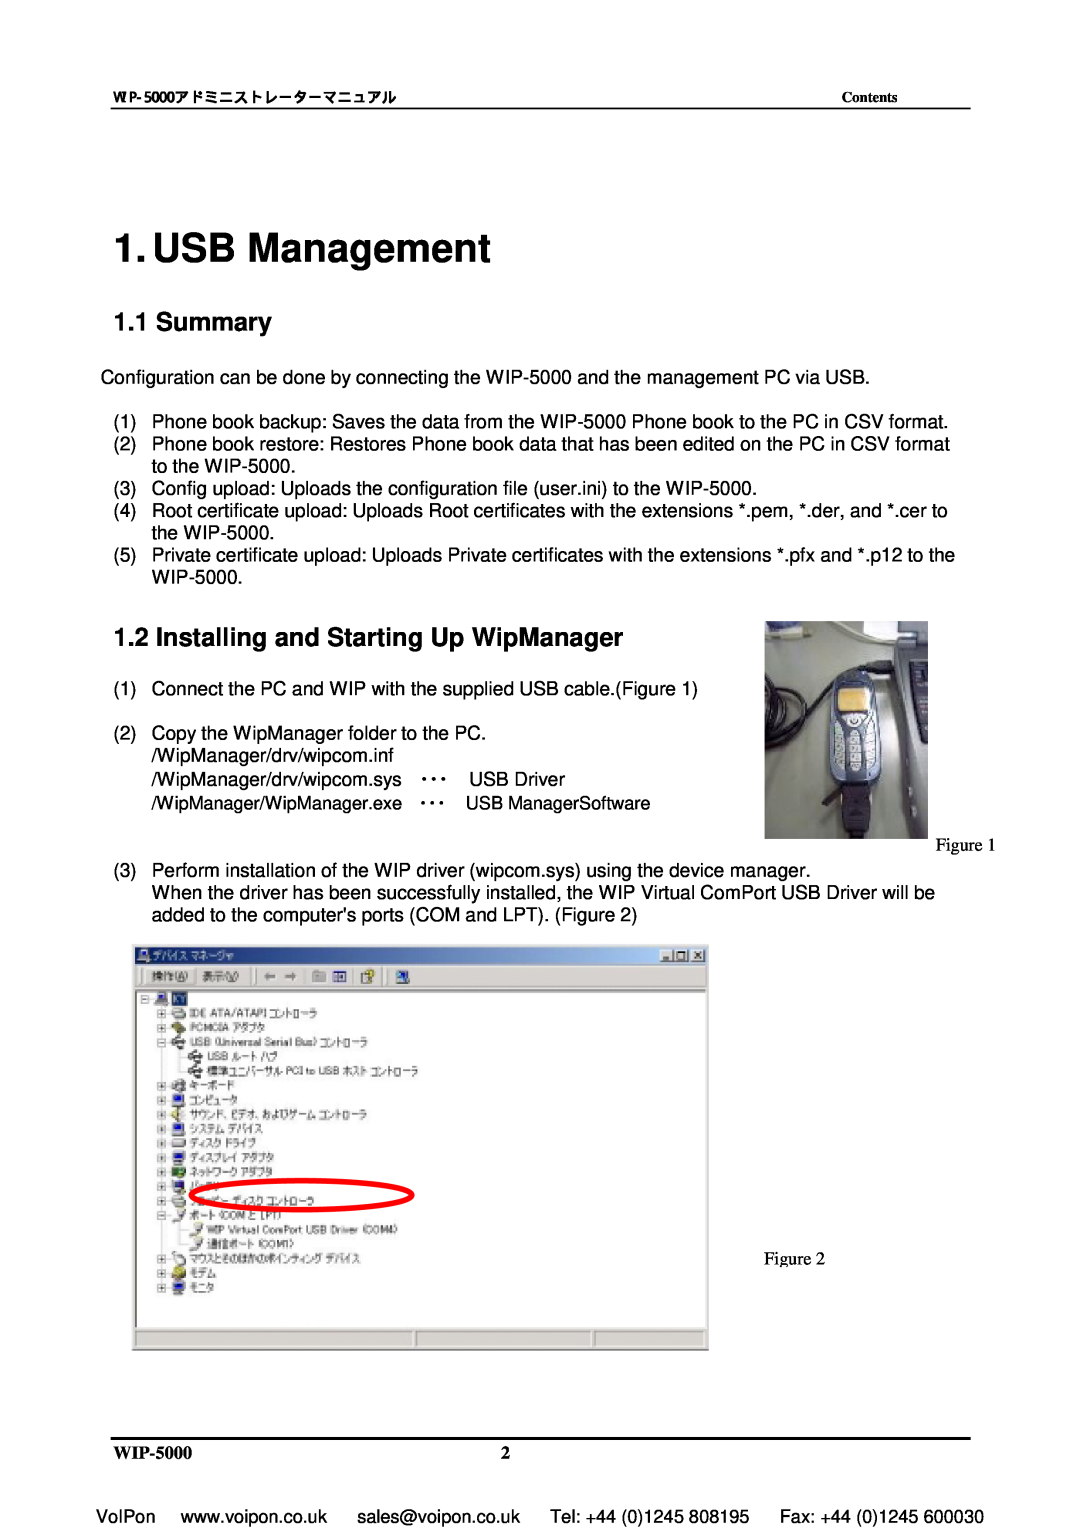 Hitachi WIP-5000 manual USB Management, Summary, Installing and Starting Up WipManager 